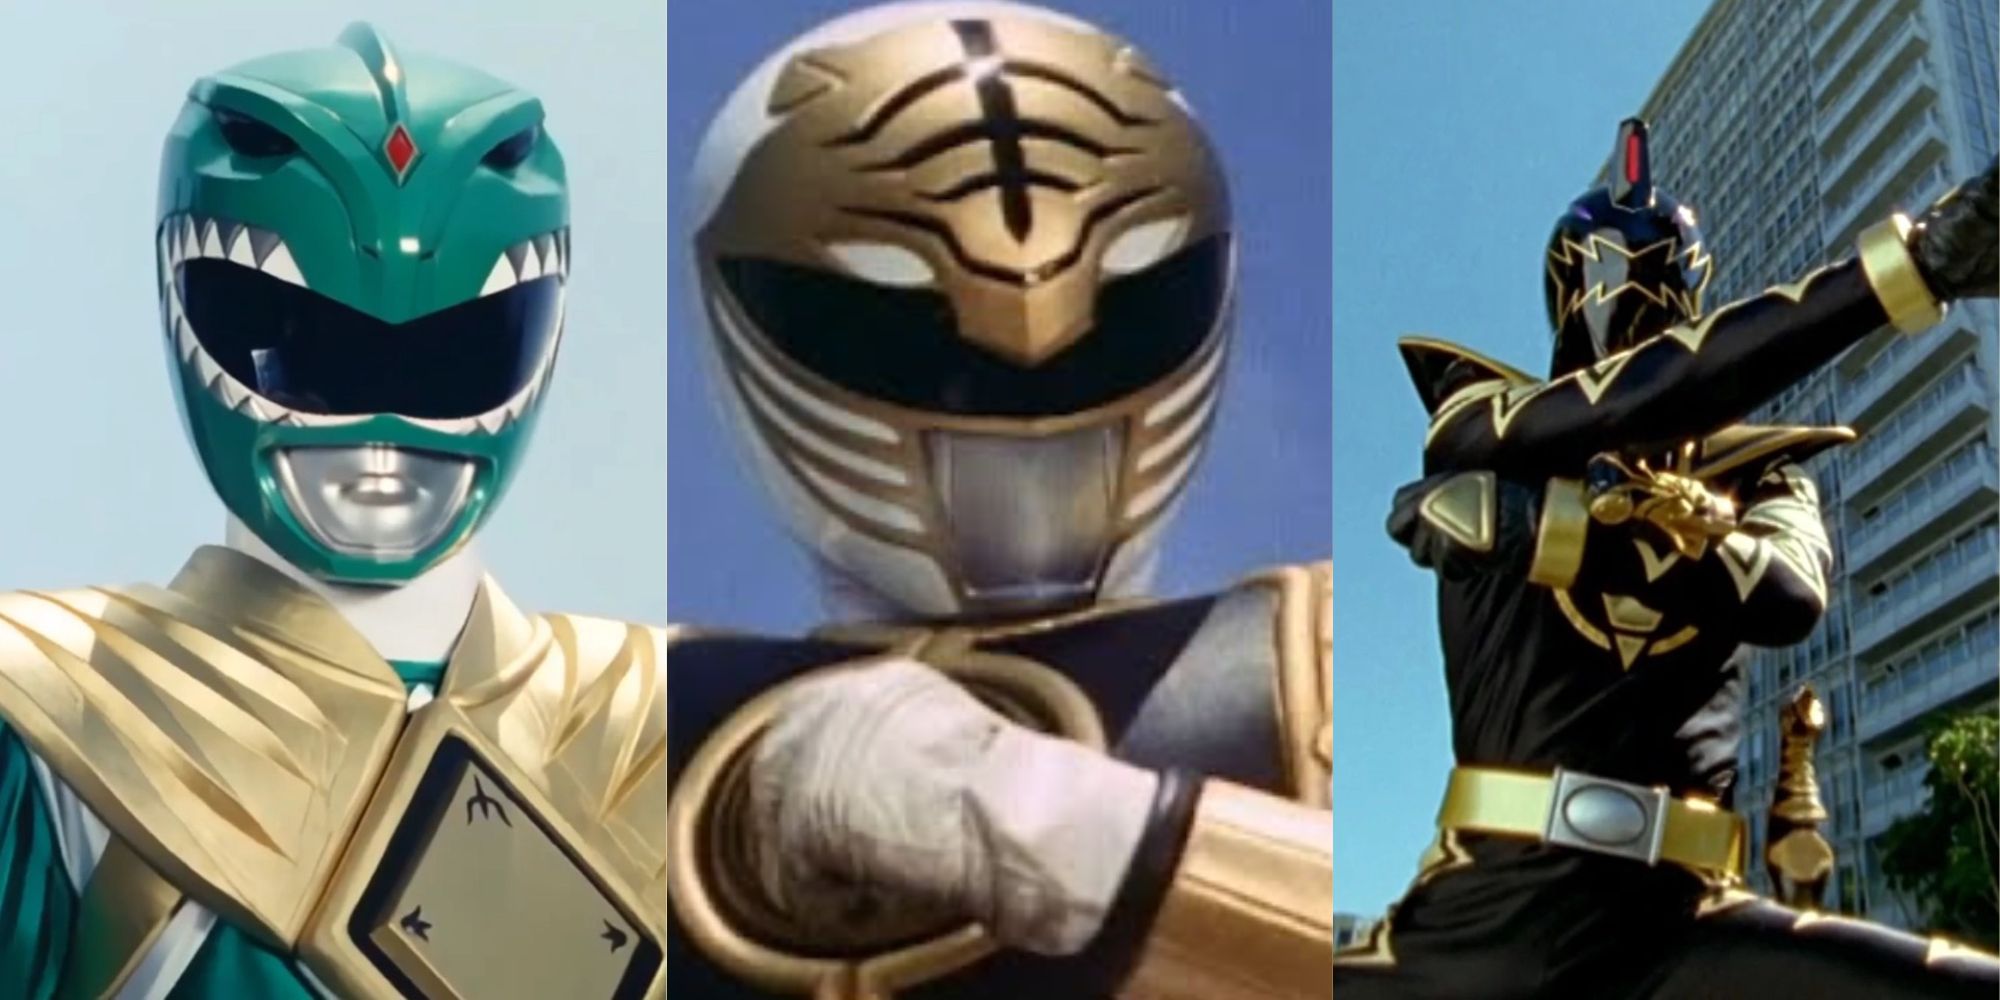 Tommy Oliver as the Green and White Mighty Morphing Ranger and Dino Black Ranger